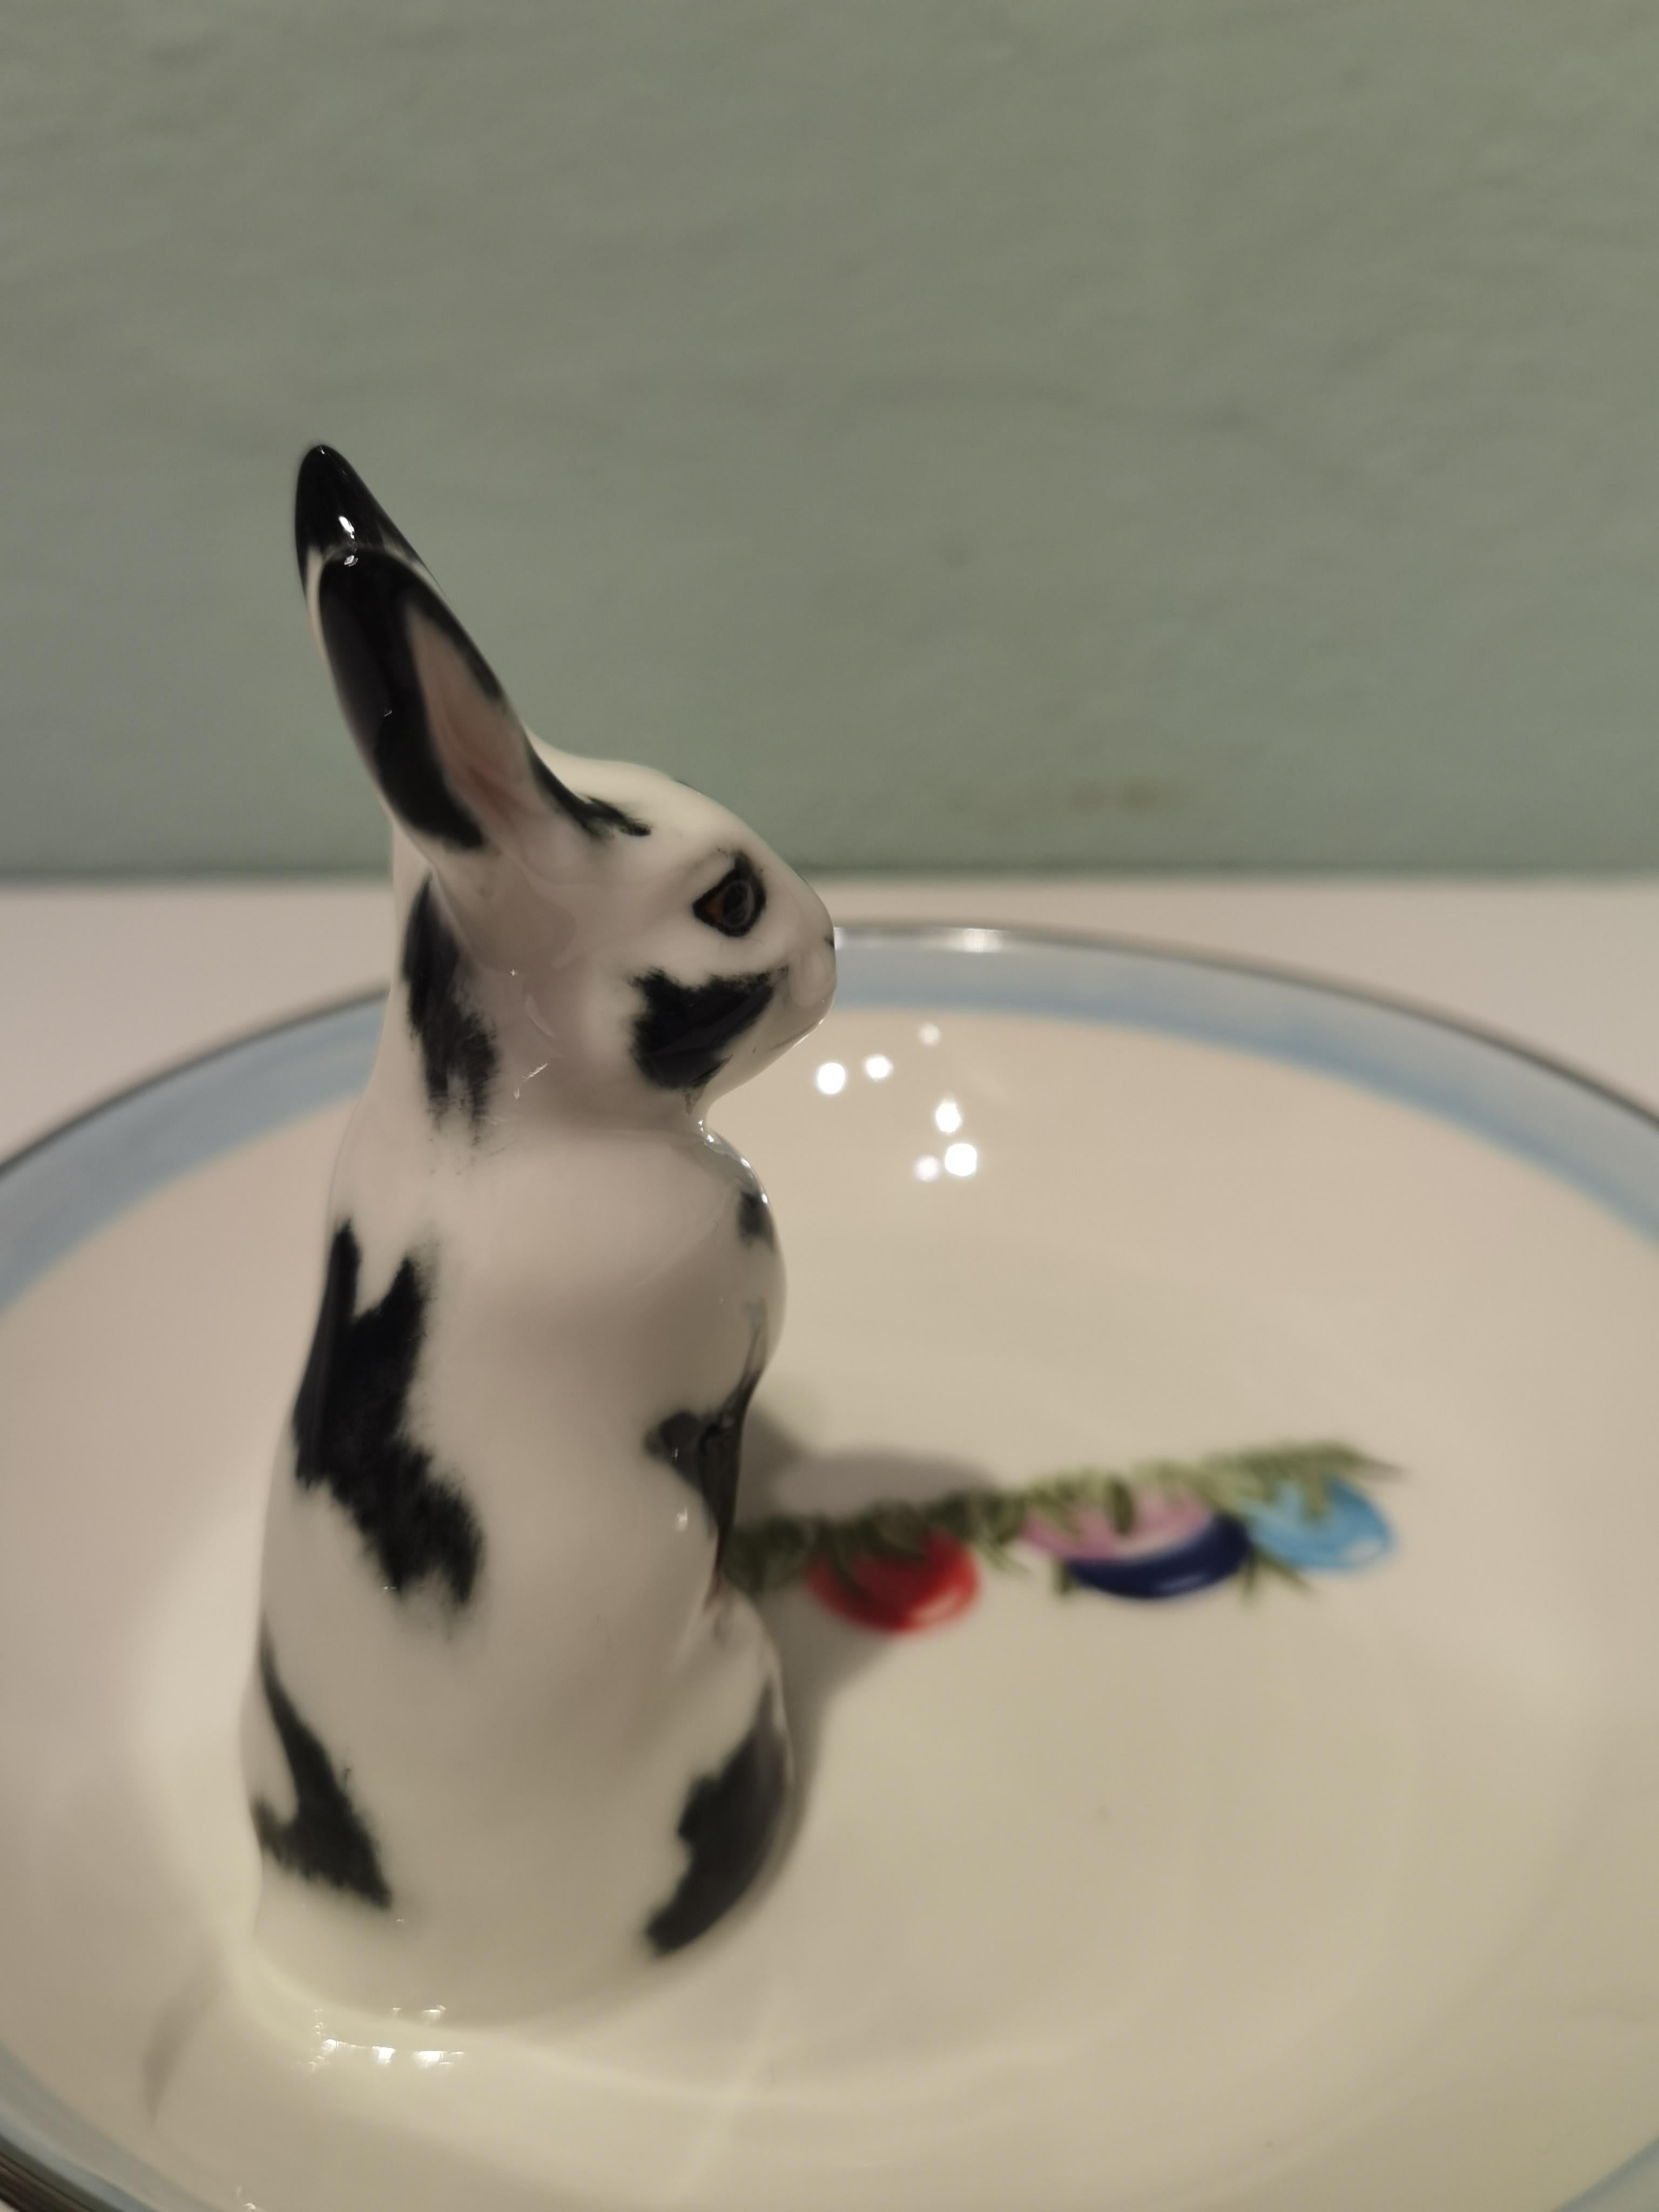 Completely handmade porcelain bowl with a hands-free naturalistic painted Easter rabbit in black and white colors. The rabbit is sitting at the side of the bowl with hand painted colored Easter eggs. Rimmed with a Fine platinum line. Handmade in